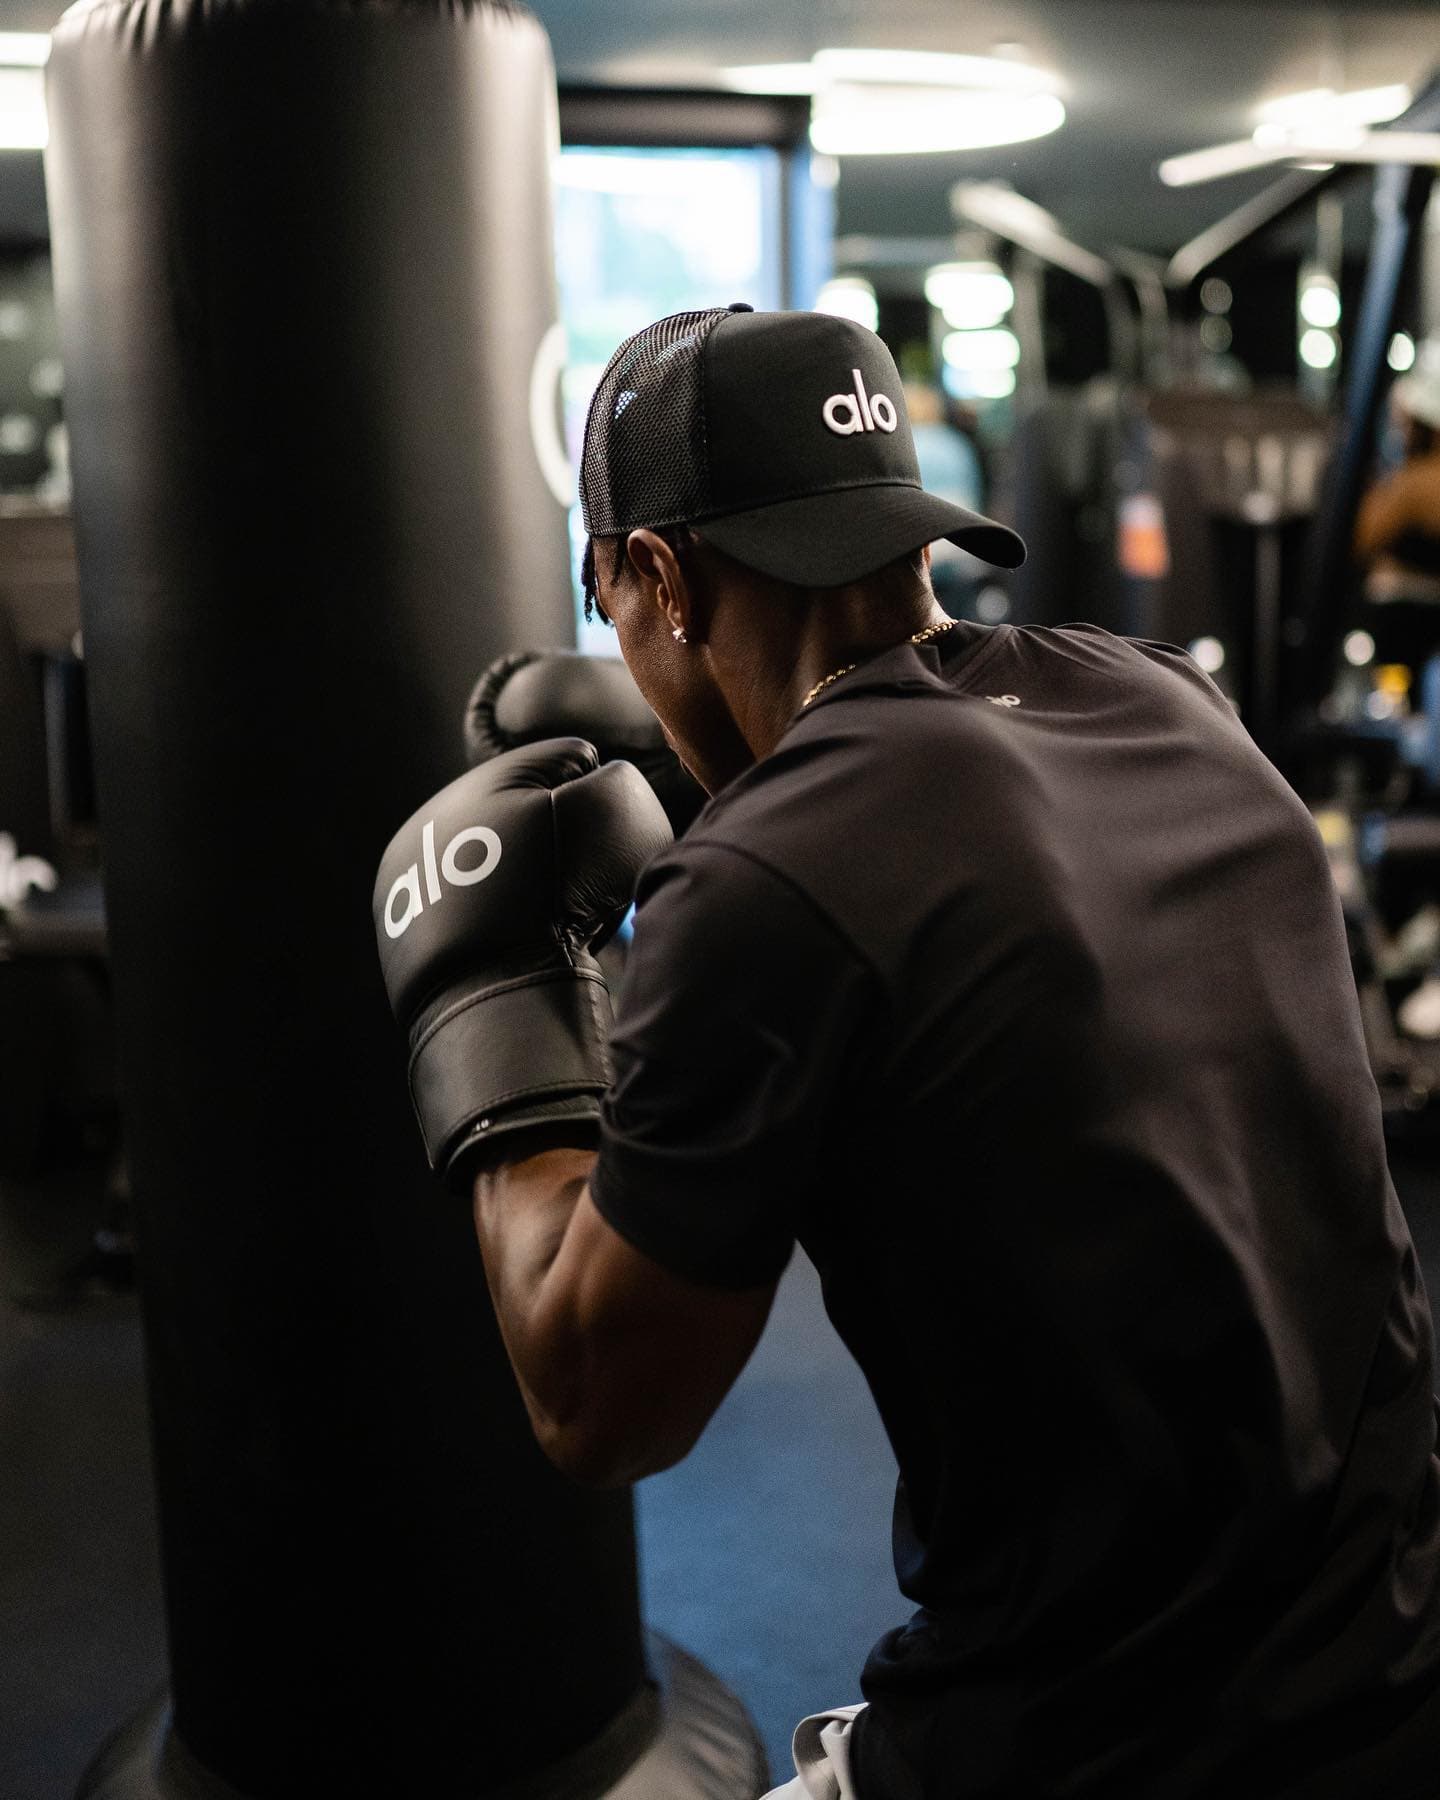 @x.flowers4 wearing a black Alo trucker hat while boxing in the Alo HQ gym.  